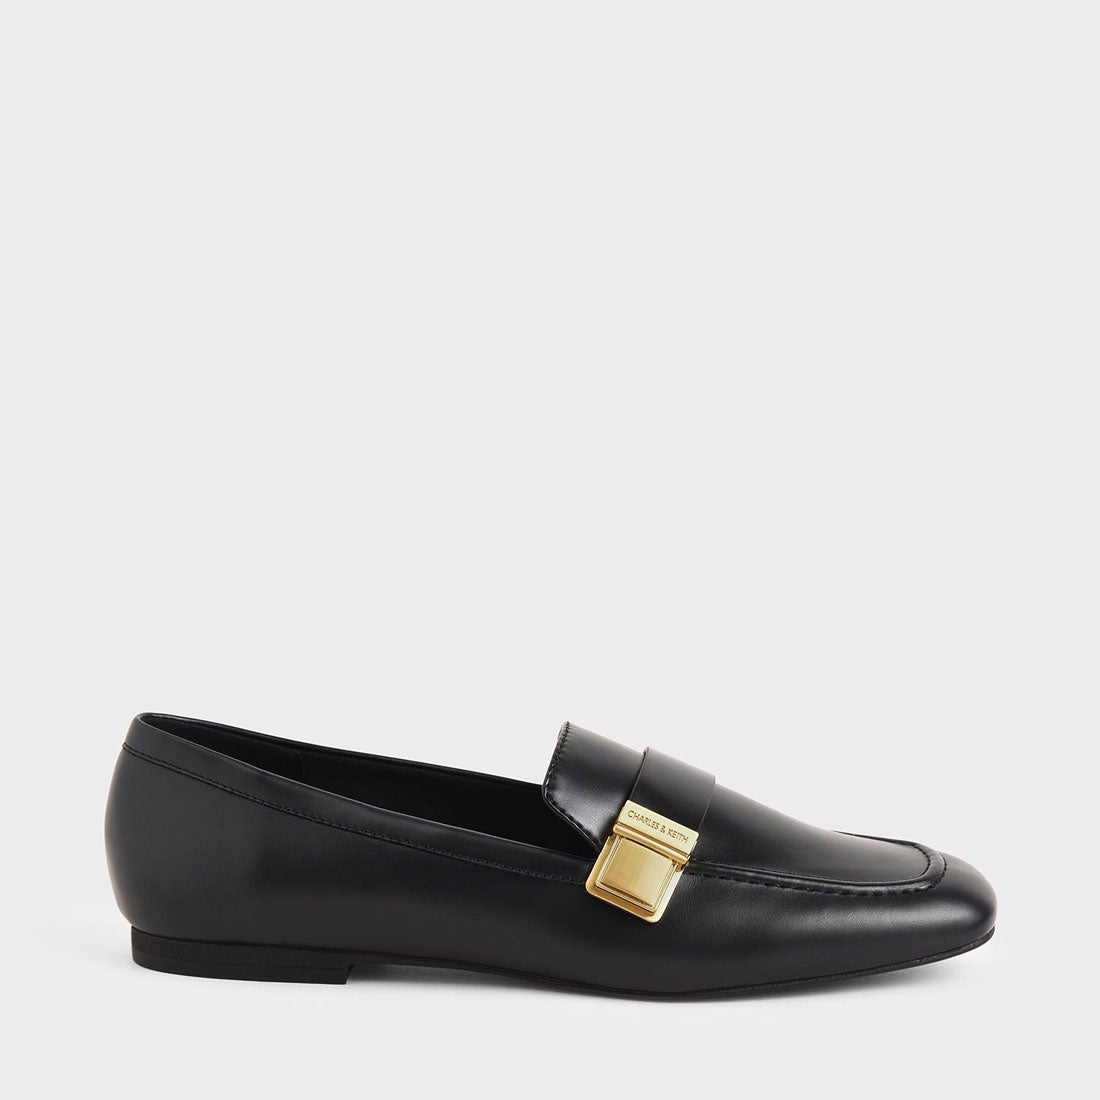 CHARLES & KEITH 【再入荷】メタリックバックル ペニーローファー / Metallic Buckle Penny Loafers